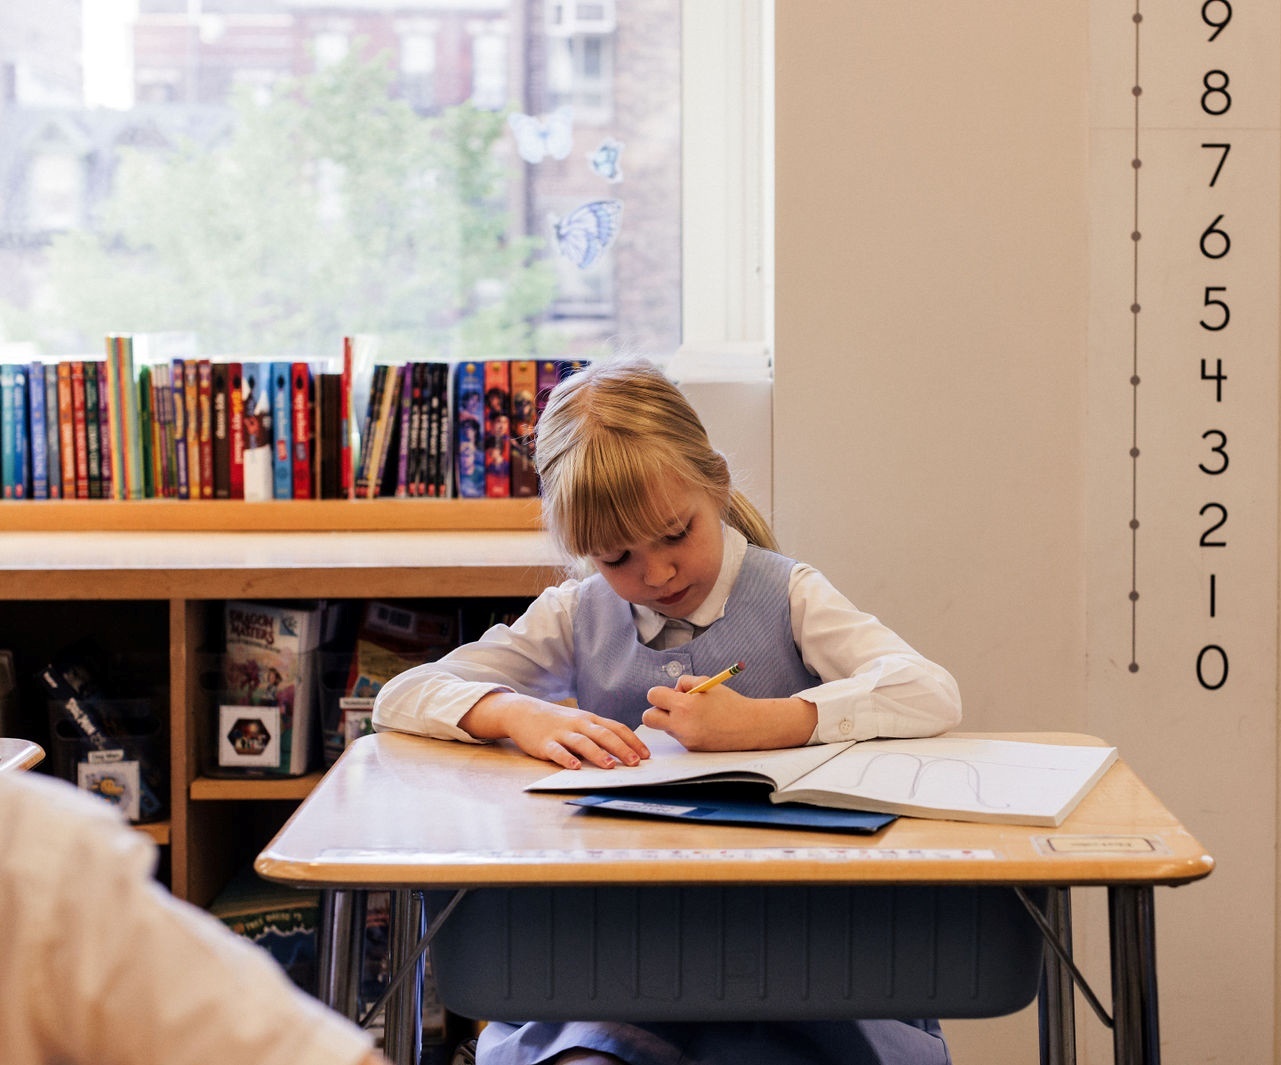 An attentive girl in a lower school environment, sitting at a desk and engaged in her academic tasks